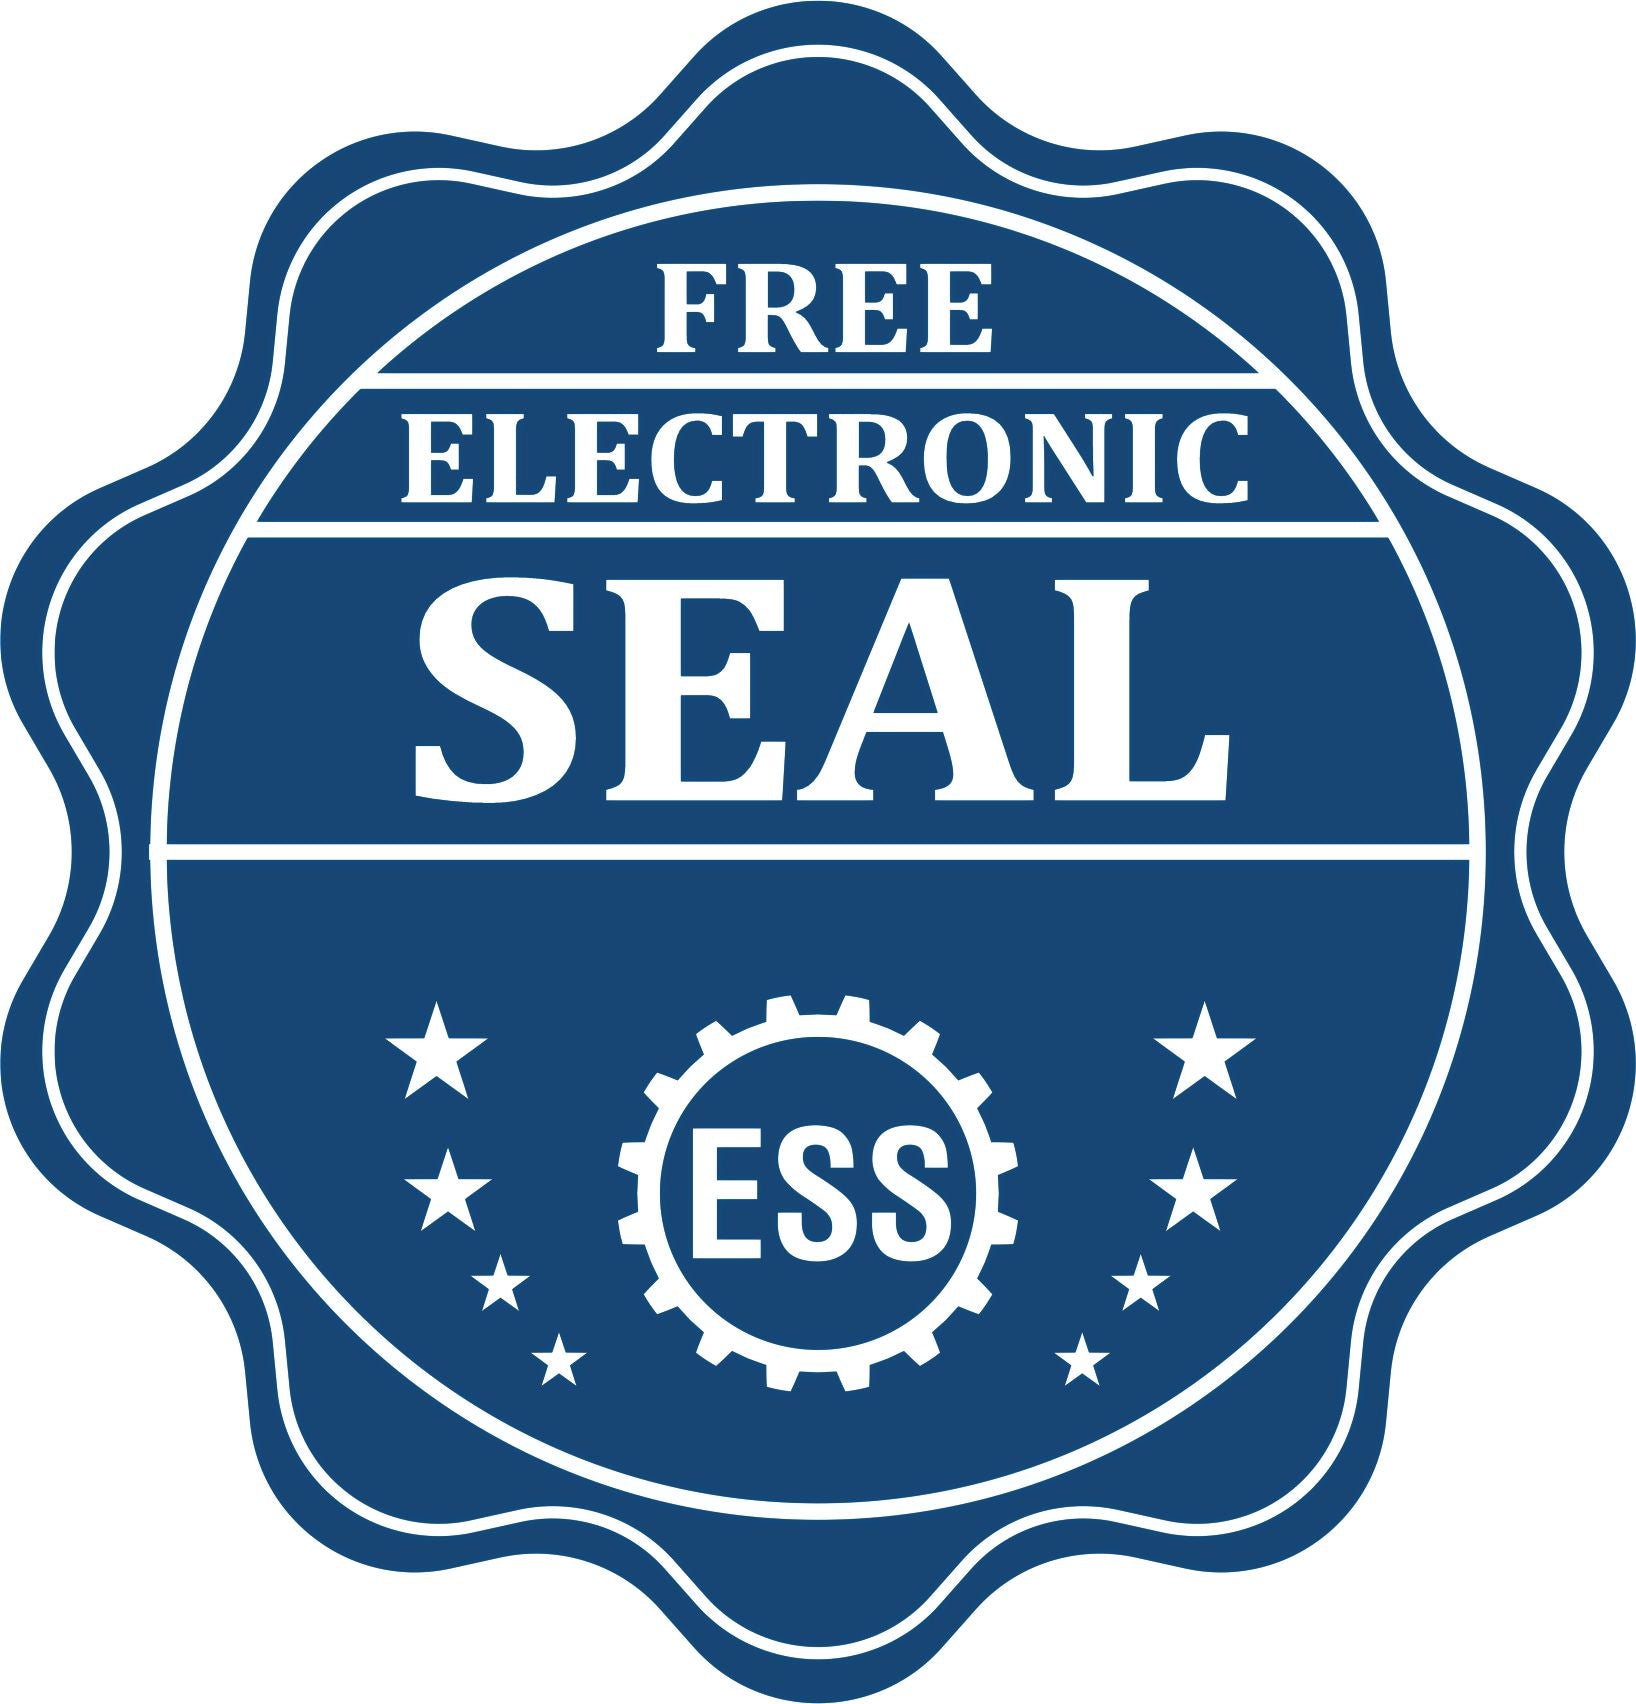 A badge showing a free electronic seal for the Alaska Desk Architect Embossing Seal with stars and the ESS gear on the emblem.